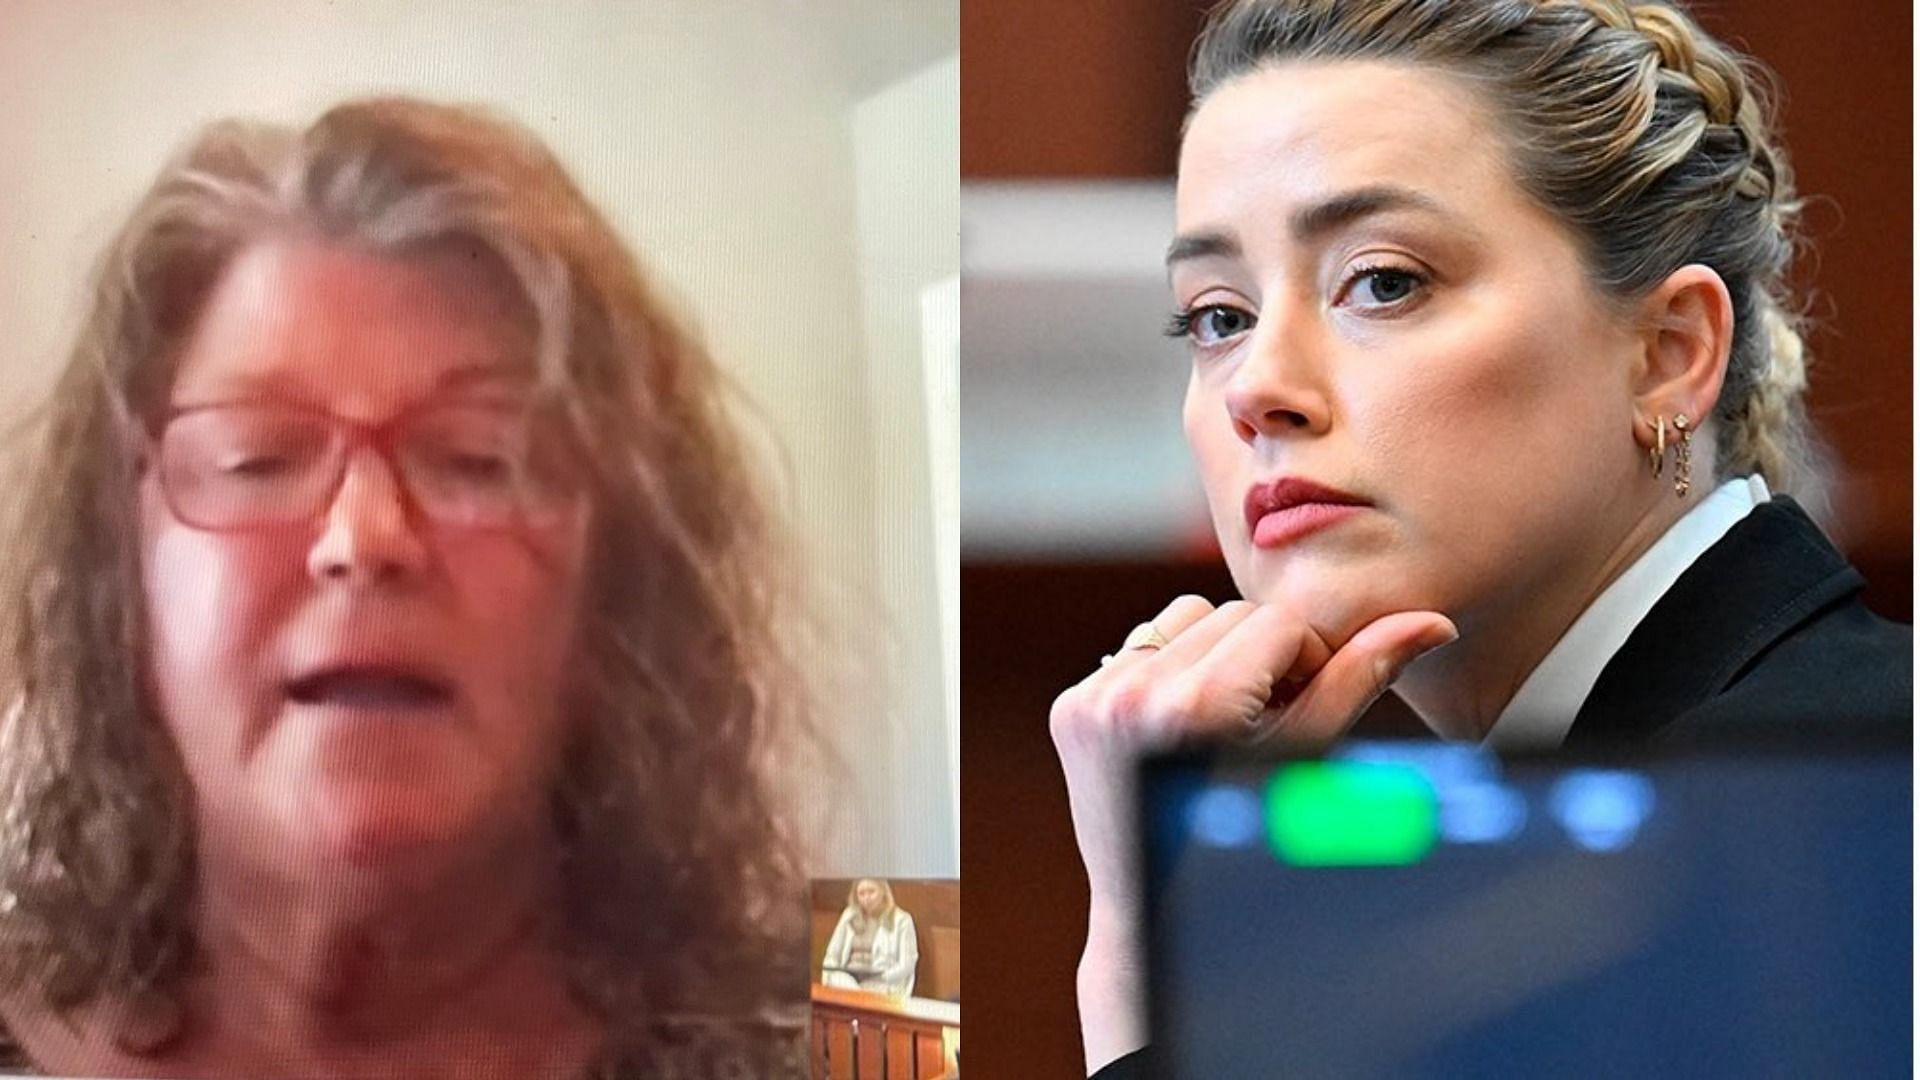 Amber Heard was detained at Seattle-Tacoma International Airport in 2009 for reportedly hitting Tasya van Ree, a woman she was seeing at the time. (Image via Twitter/@source411/@piscesflowers)